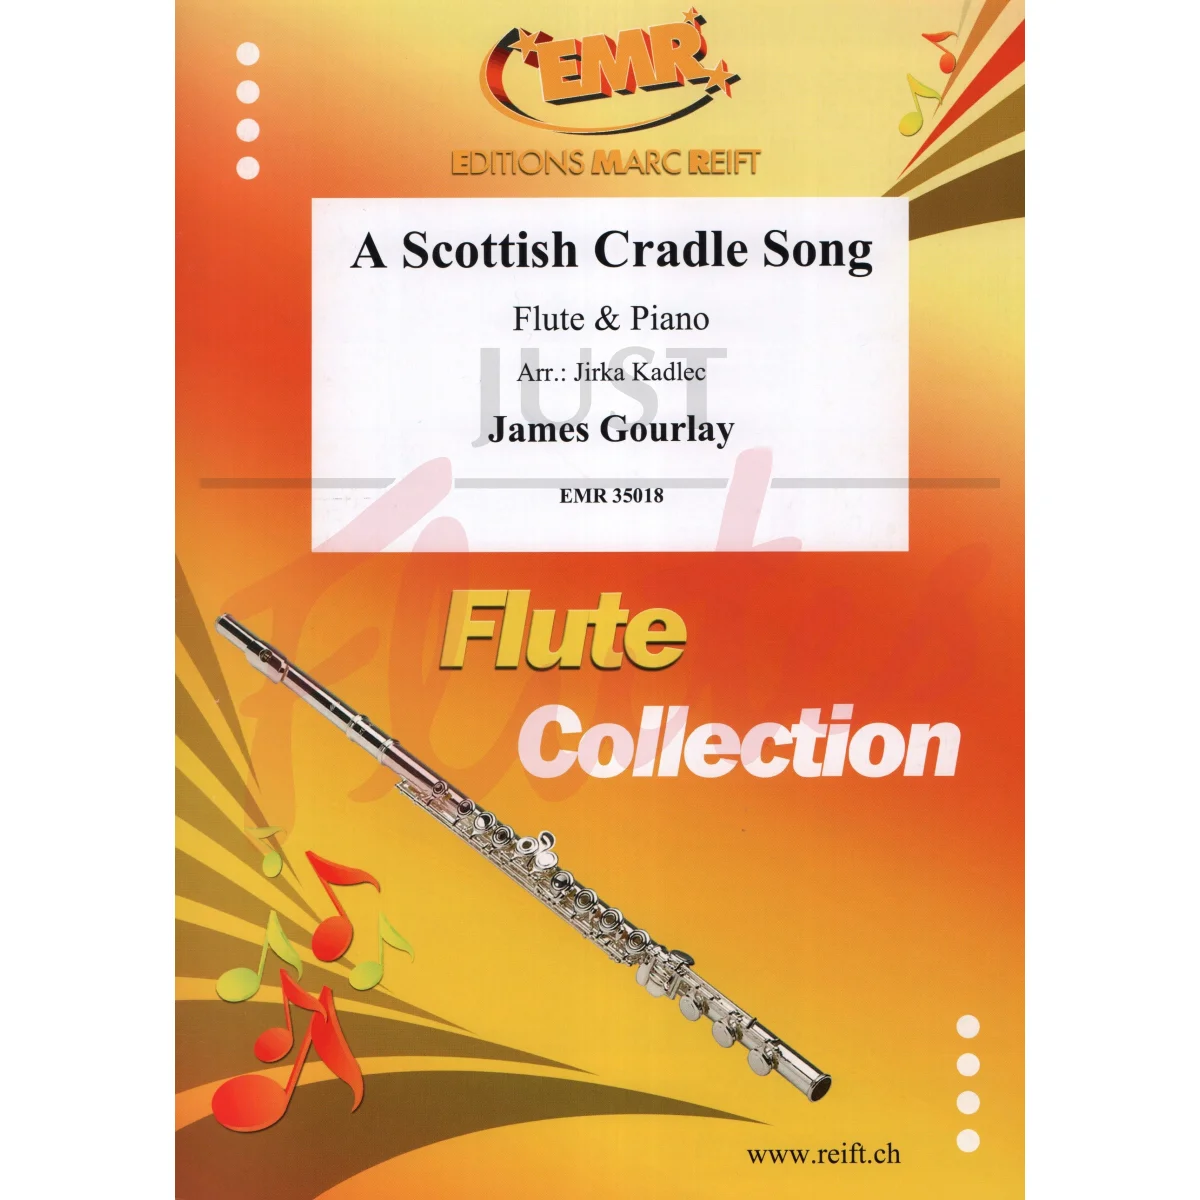 A Scottish Cradle Song for Flute and Piano